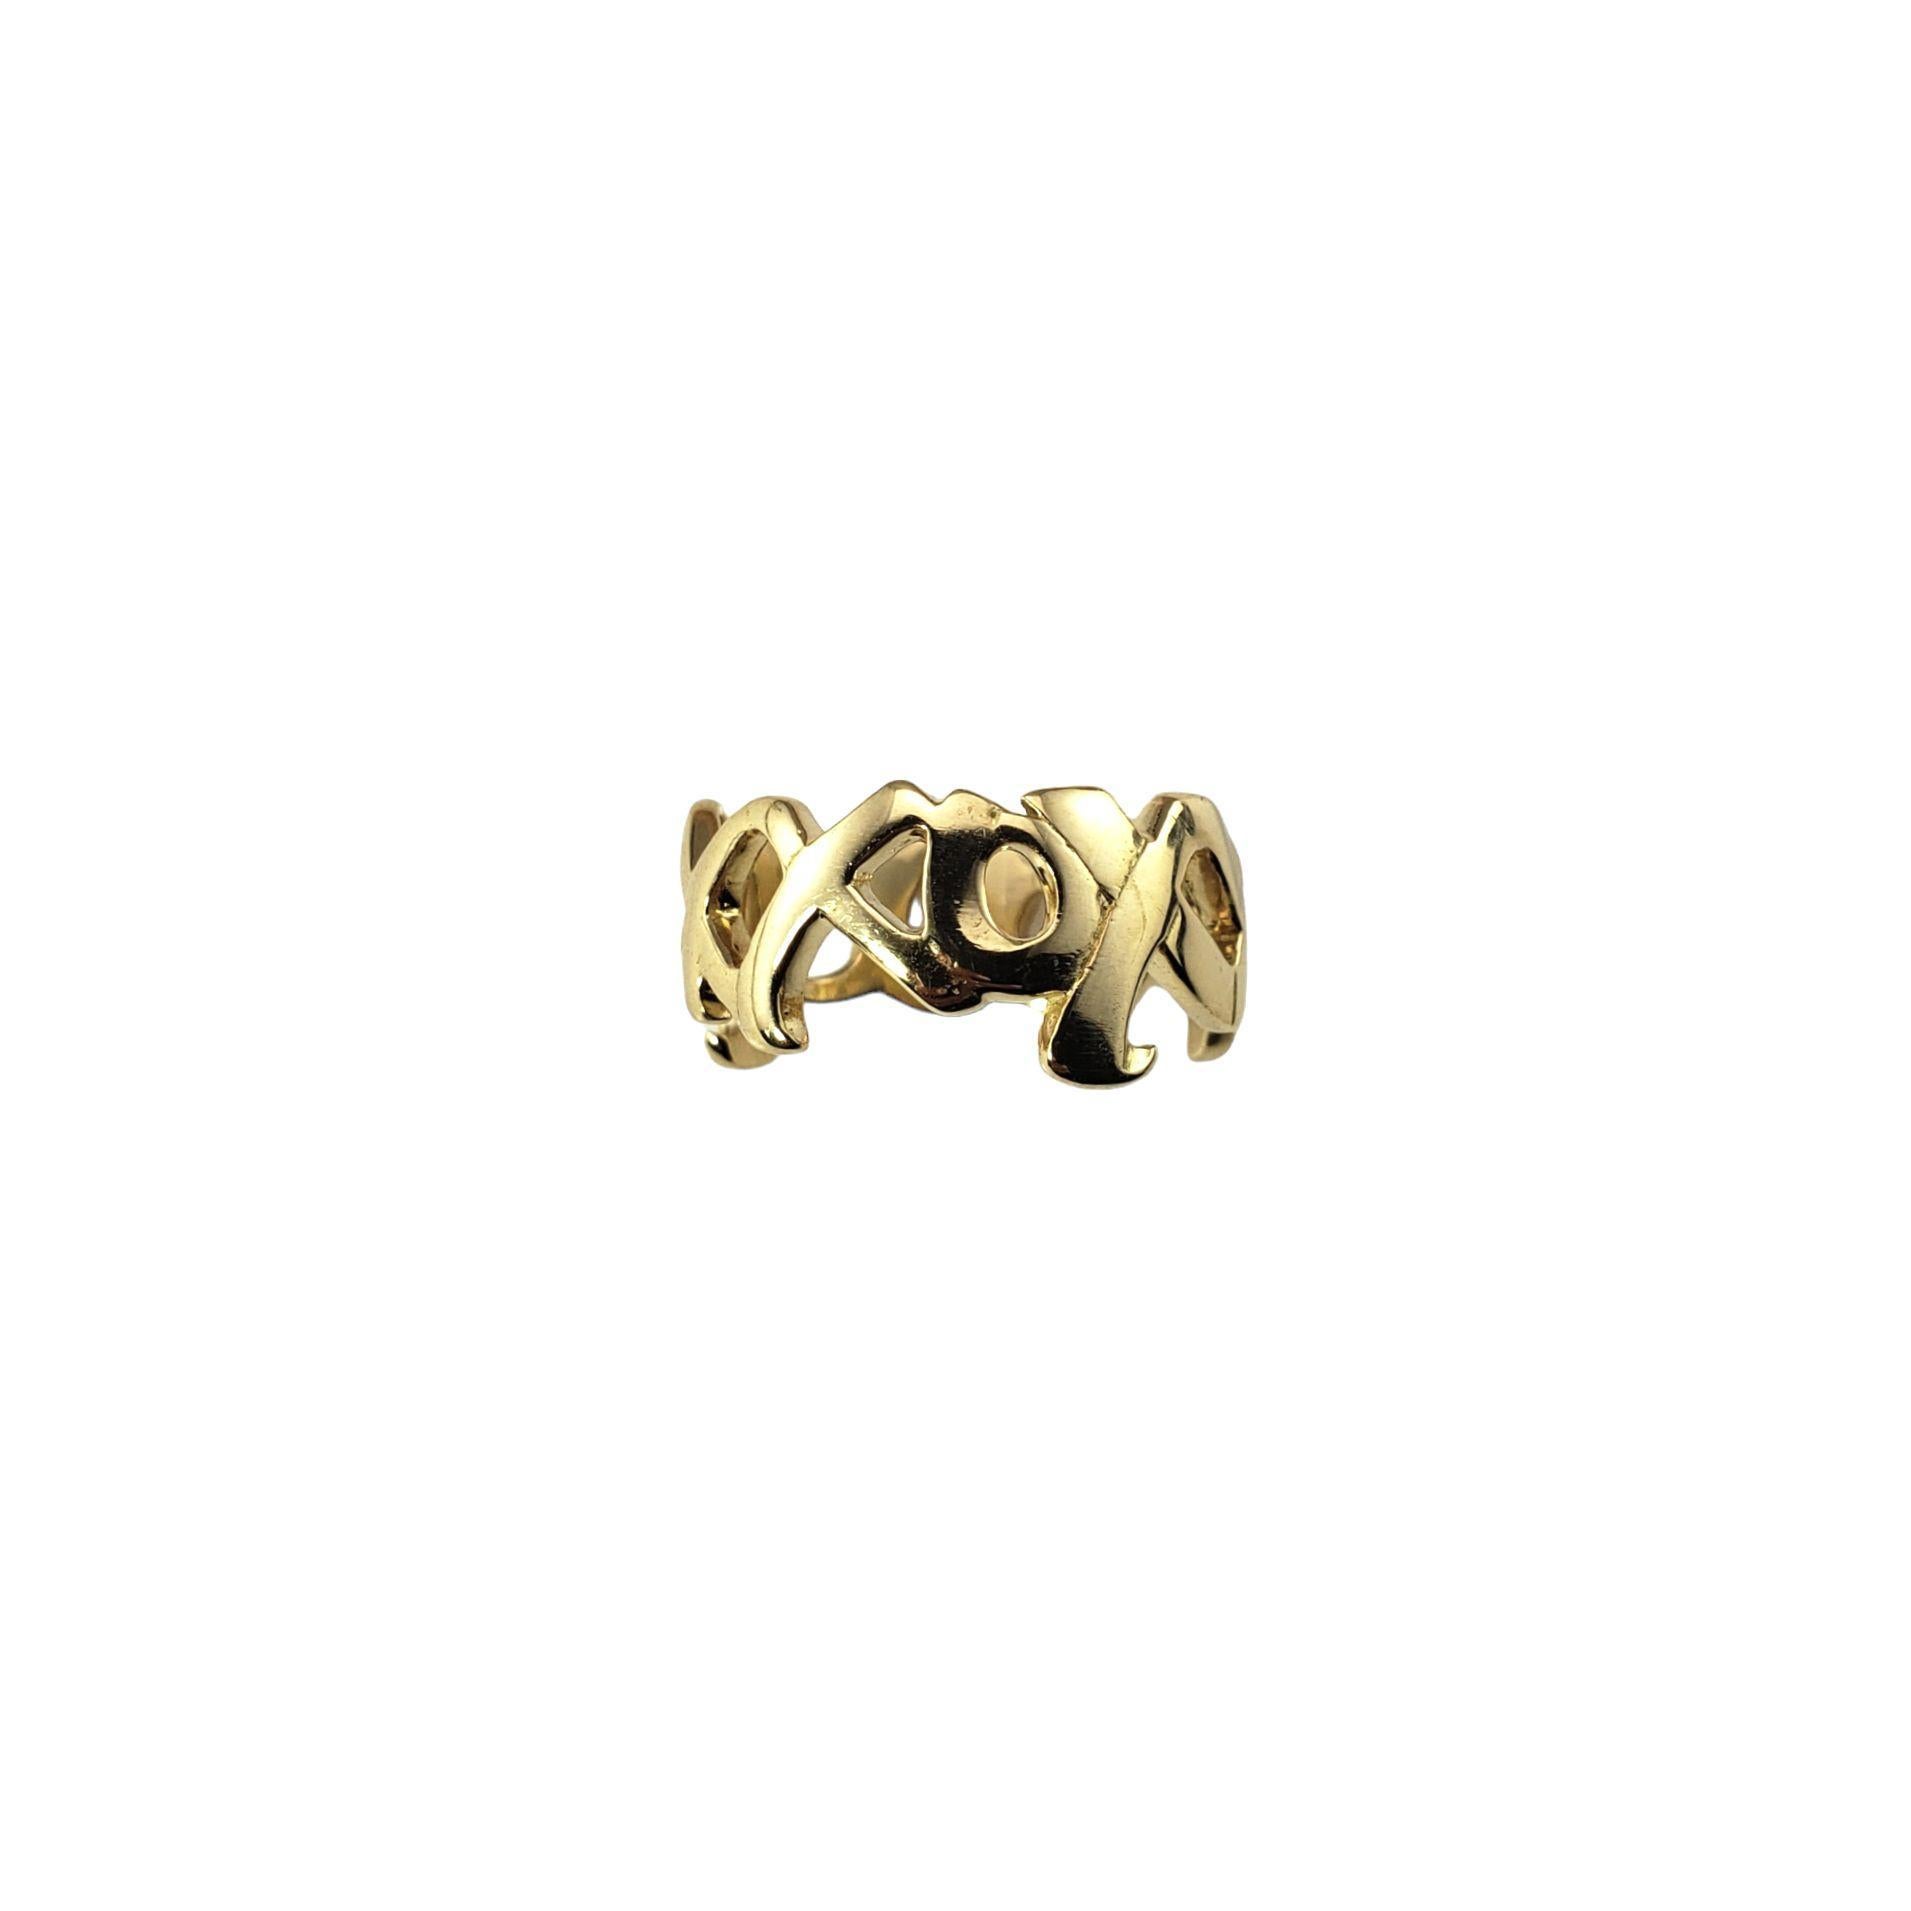 Tiffany & Co. Paloma Picasso 18 Karat Yellow Gold Hugs and Kisses Ring Size 6.75-

This elegant ring by Paloma Picasso for Tiffany & Co. features the traditional symbols for hugs and kisses crafted in 18K yellow gold.

Width: 10.3 mm.

Ring size: